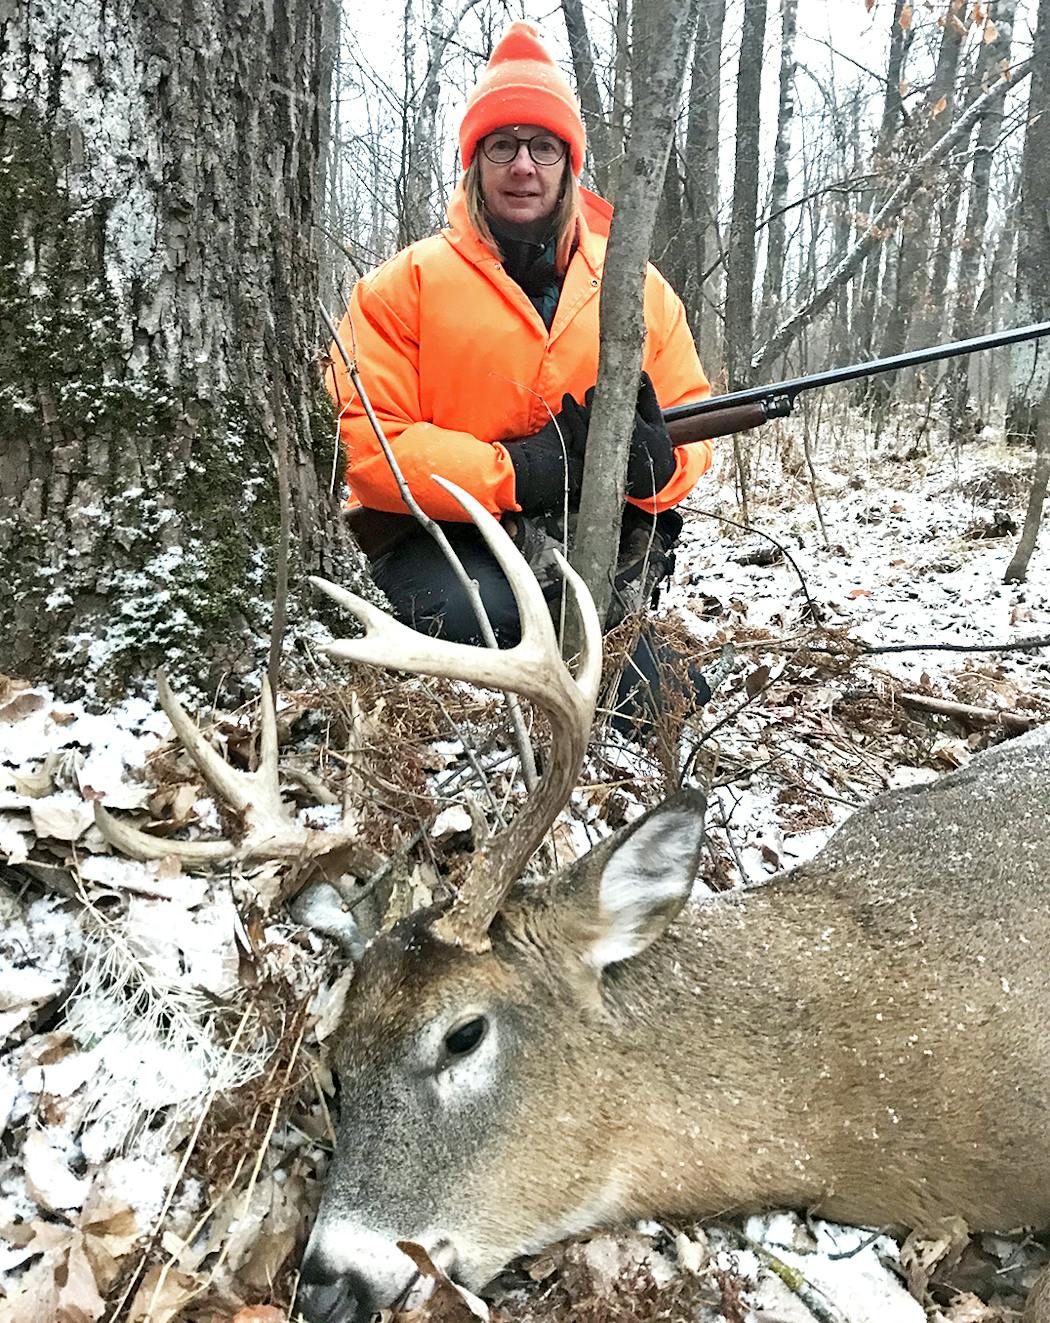 Ann Jackson of Minneapolis had never fired a shot in 28 years of deer hunting on her mother’s land near Twin Valley, Minn. The streak ended Sunday when this 10-pointer got too close. She was facing into the wind, seated in an open tripod stand 11 feet off the ground.